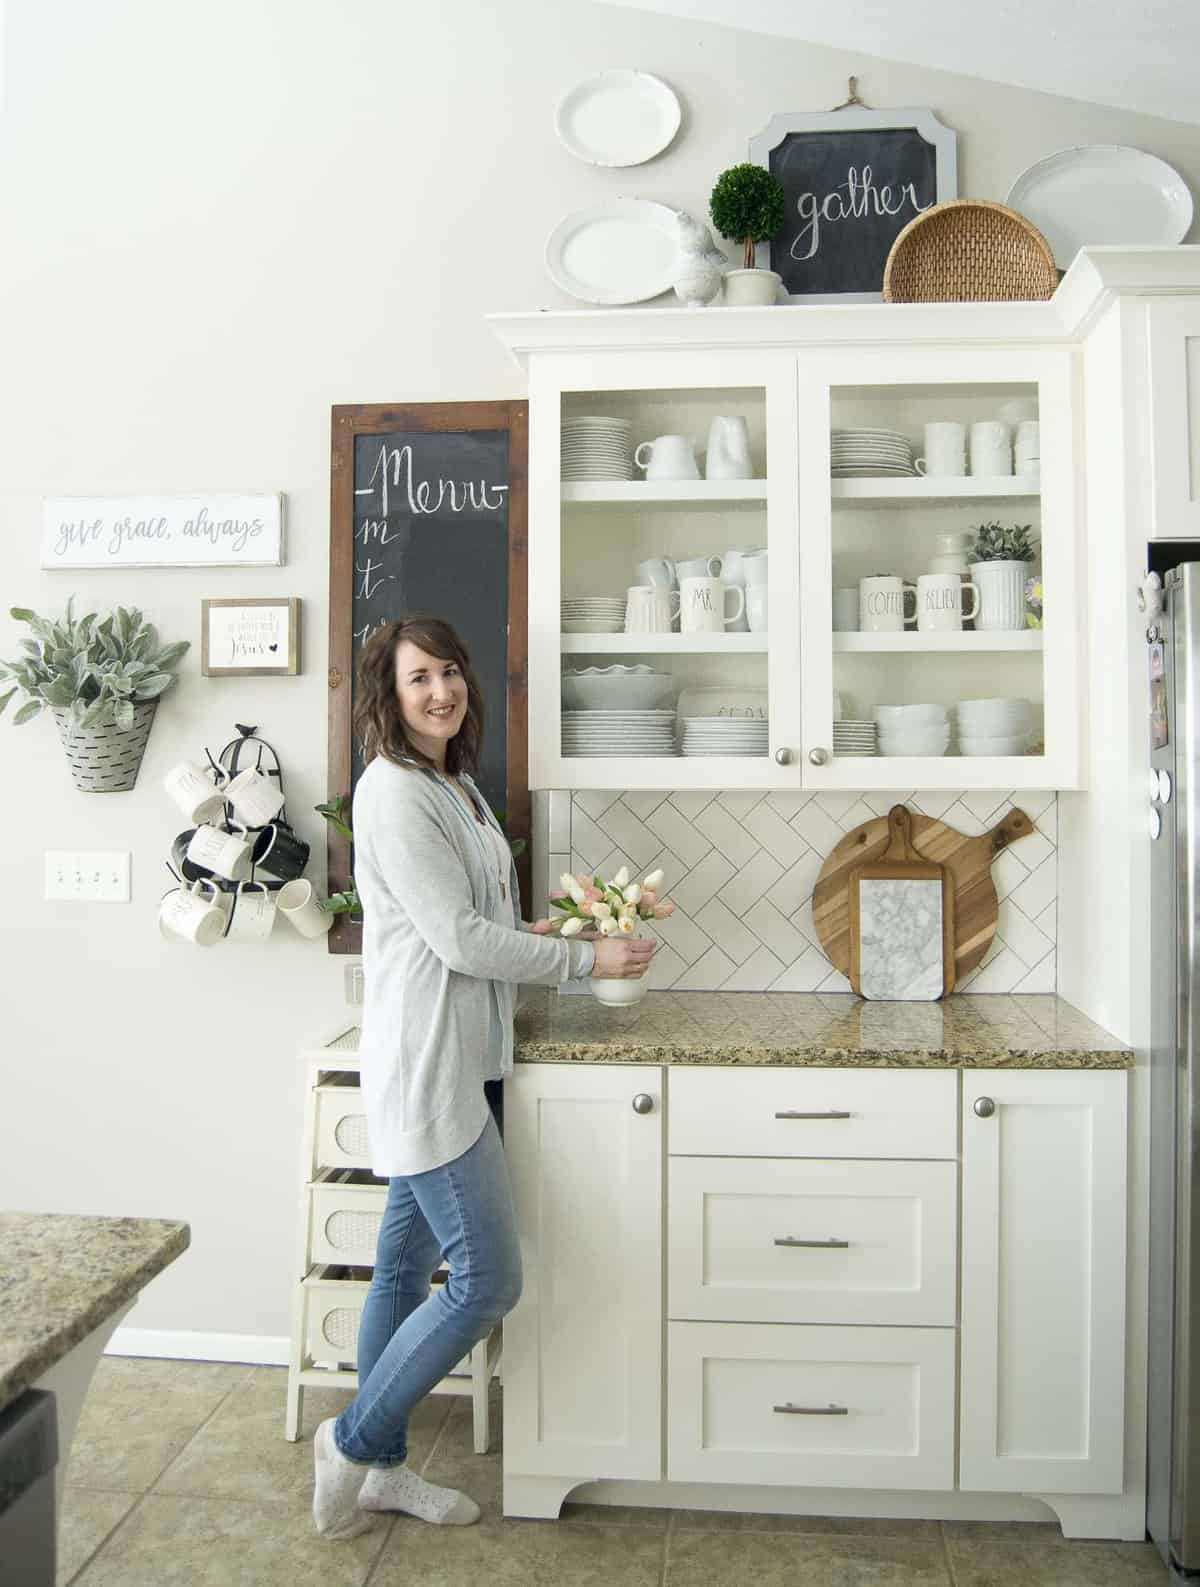 Are you looking for pretty and practical spring kitchen decor ideas? Here are some sure fire ways to beautify your spring kitchen decor and bring some sunshine and life back into your kitchen. This is perfect for the modern farmhouse kitchen lover who enjoys a bit of character in her home.